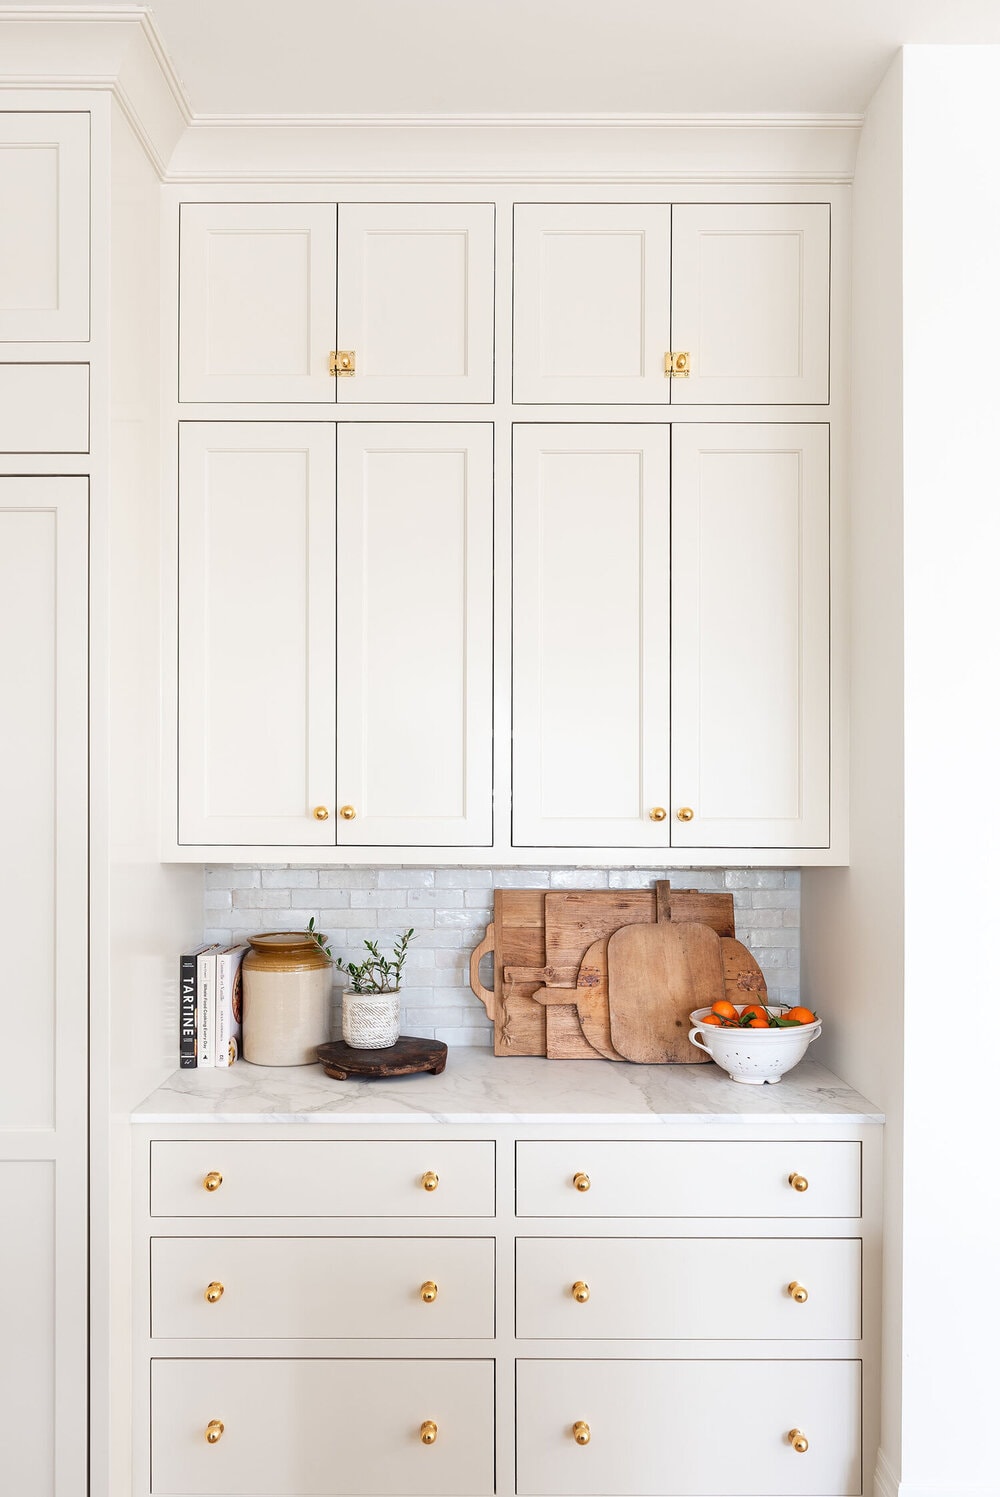 Light cream colored kitchen cabinets with gold hardware